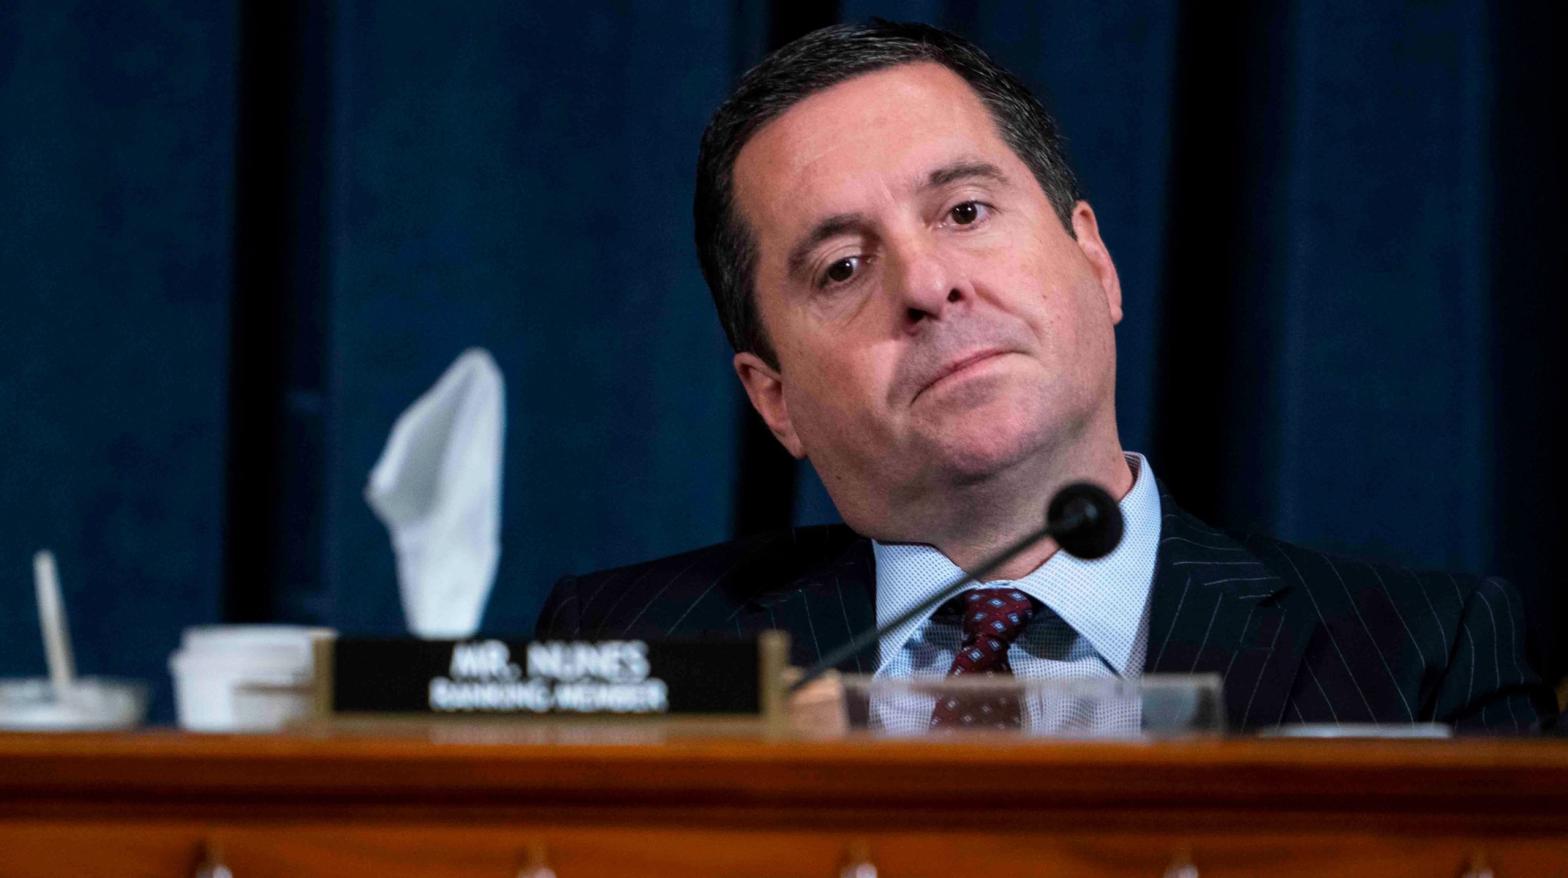 House Intelligence Committee Ranking Member Devin Nunes (R-CA) listens to testimony during the impeachment inquiry into US President Donald Trump on November 20, 2019.  (Photo: Doug Mills, Getty)